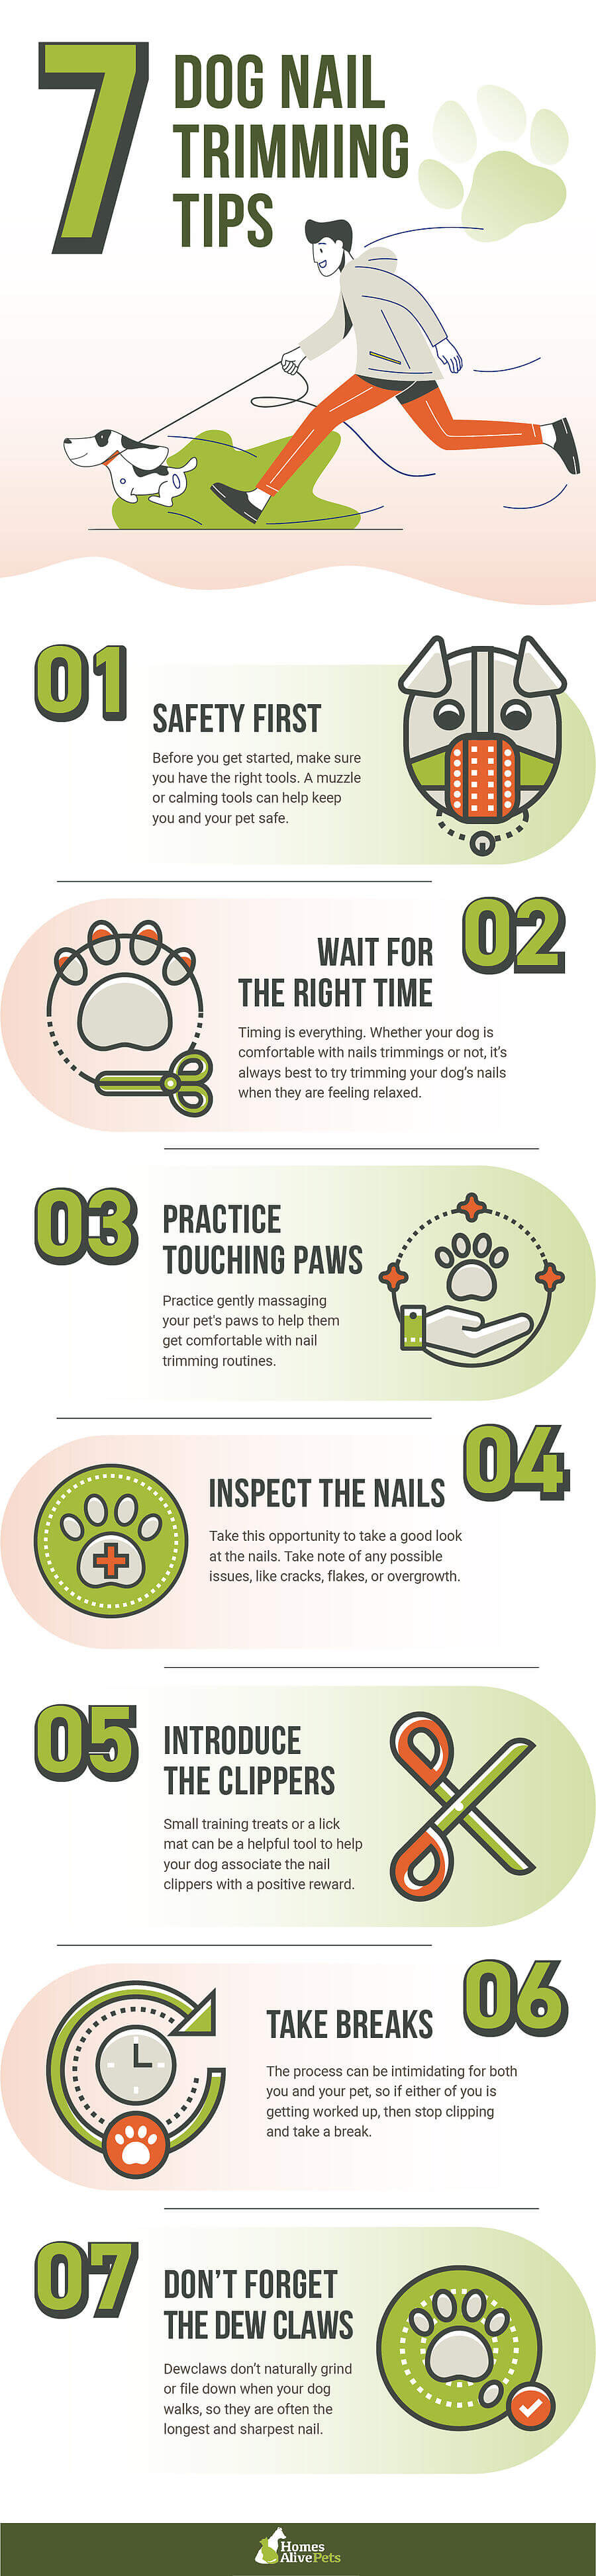 7 Dog Nail Trimming Tips - updated